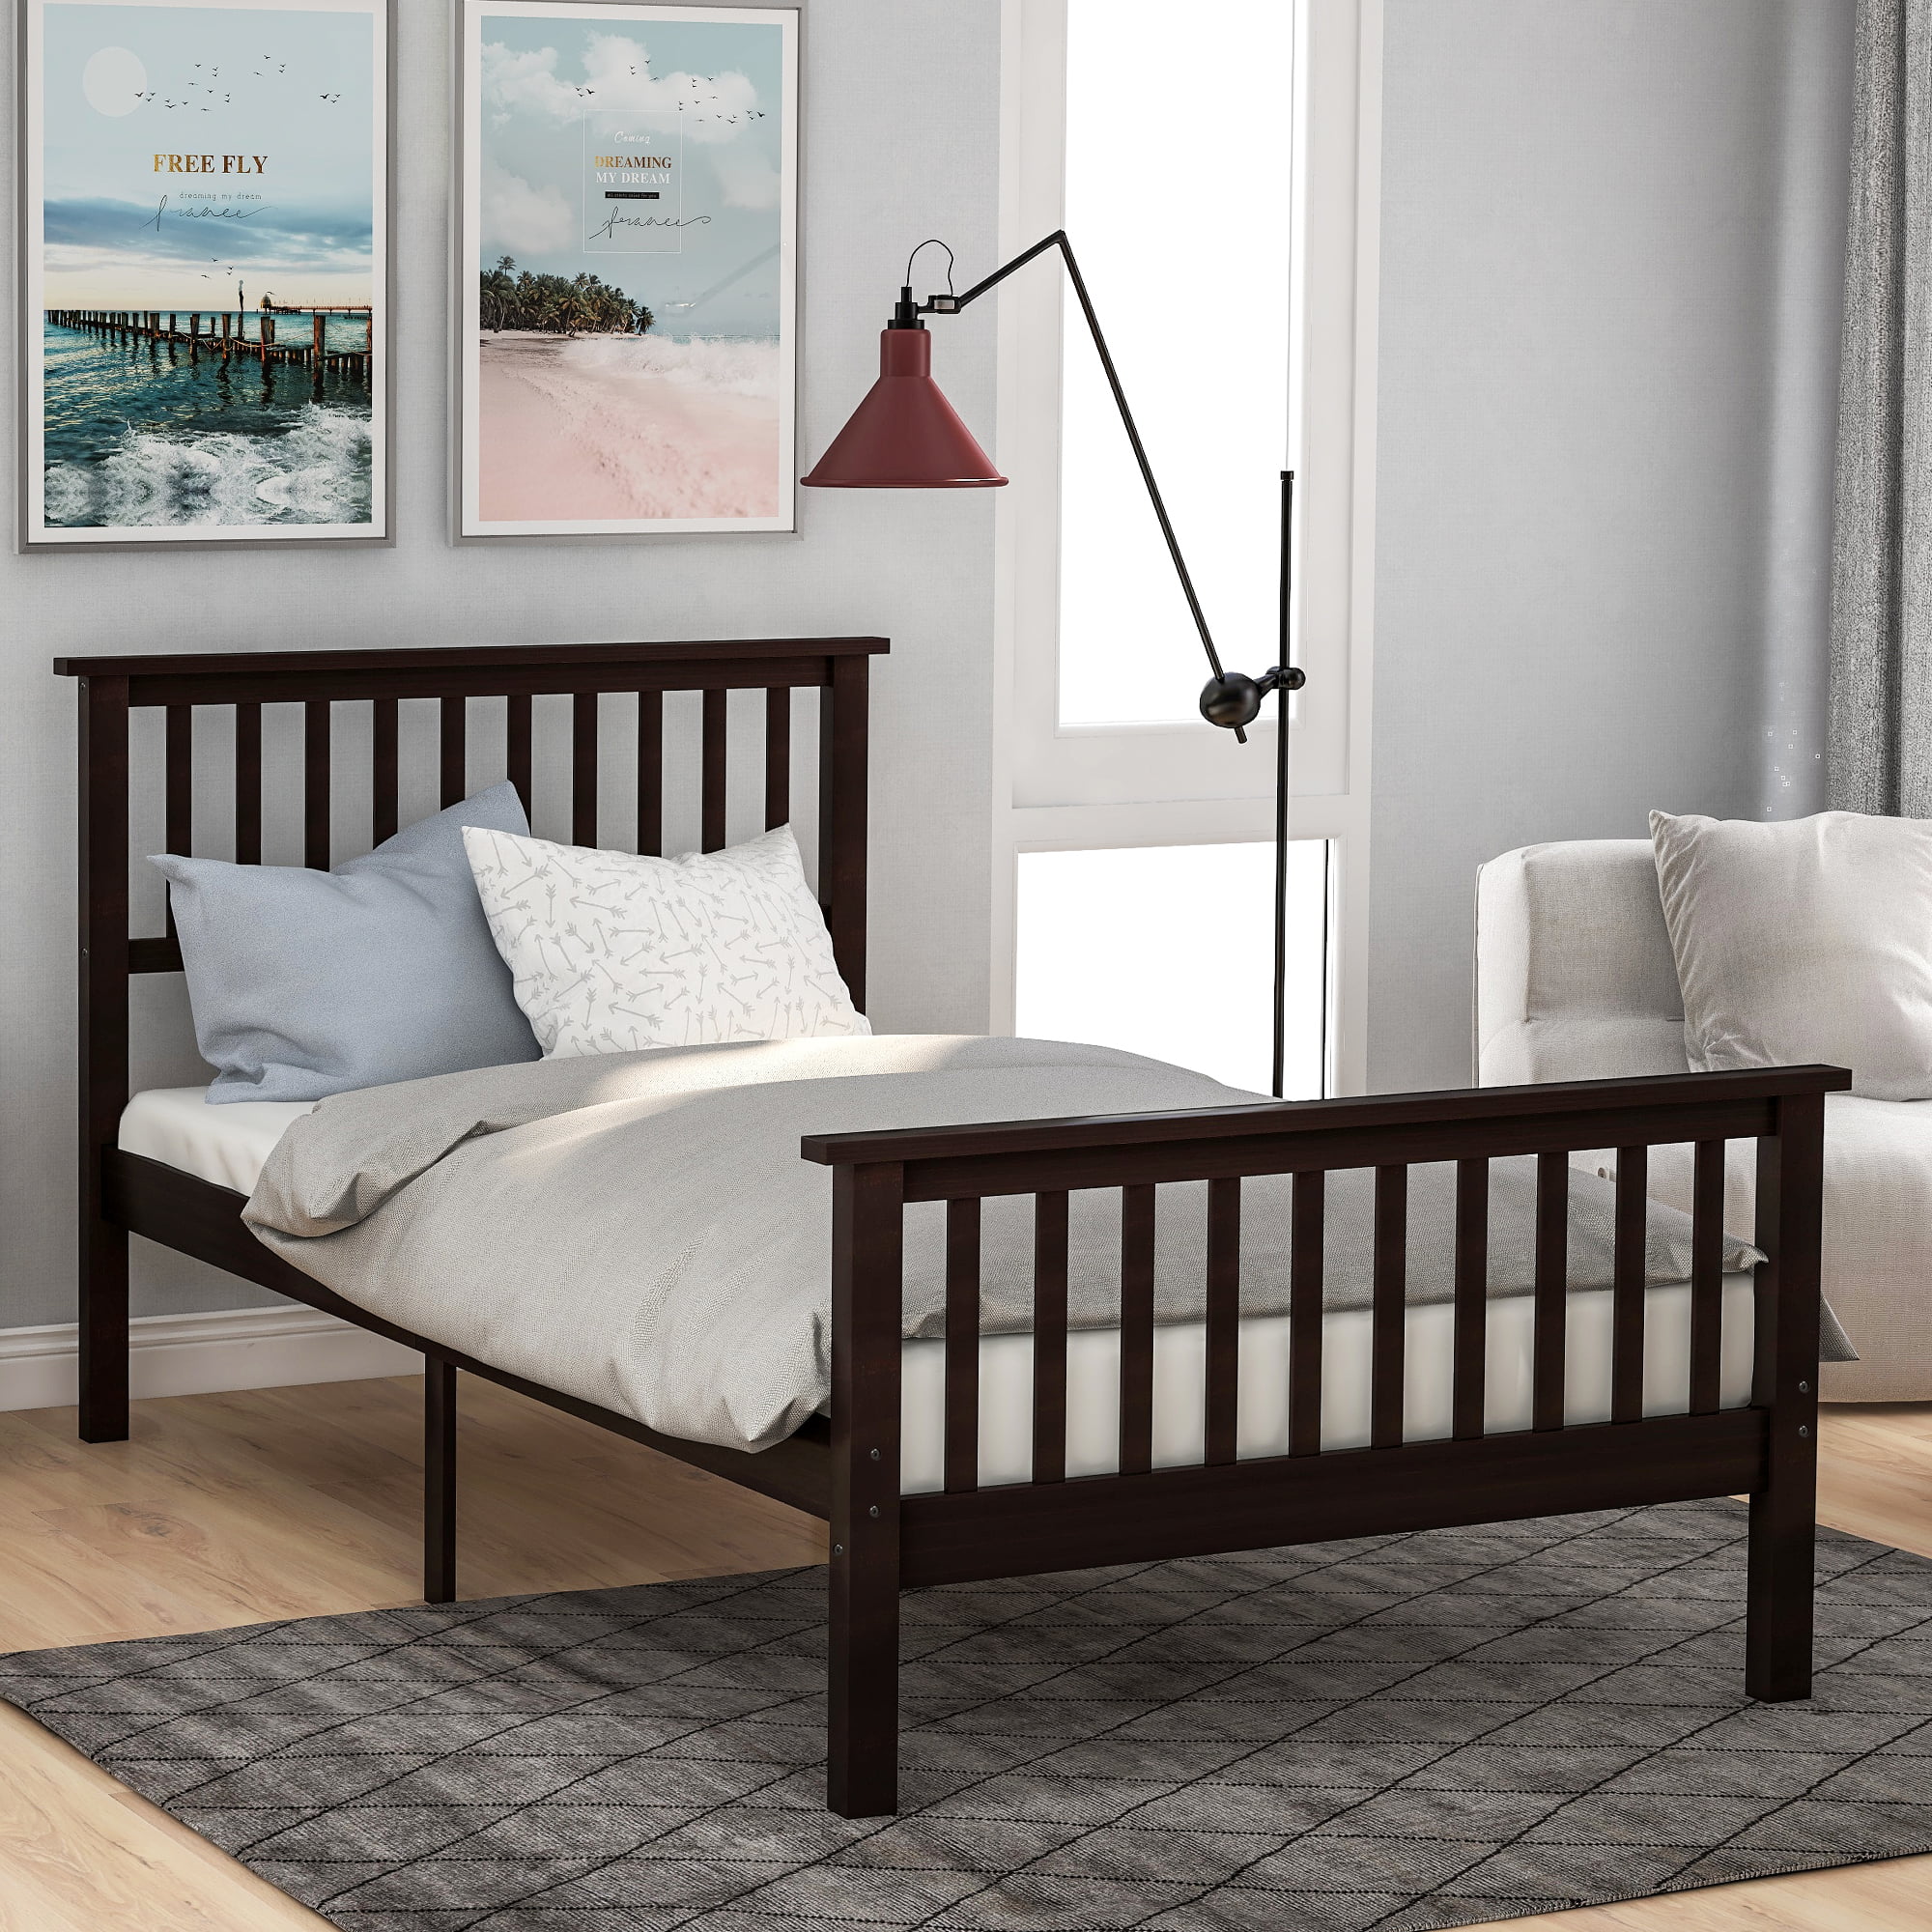 Details about   New Twin/Full/Queen Size Bed Frame Headboard Platform Wooden Bedroom Furniture 